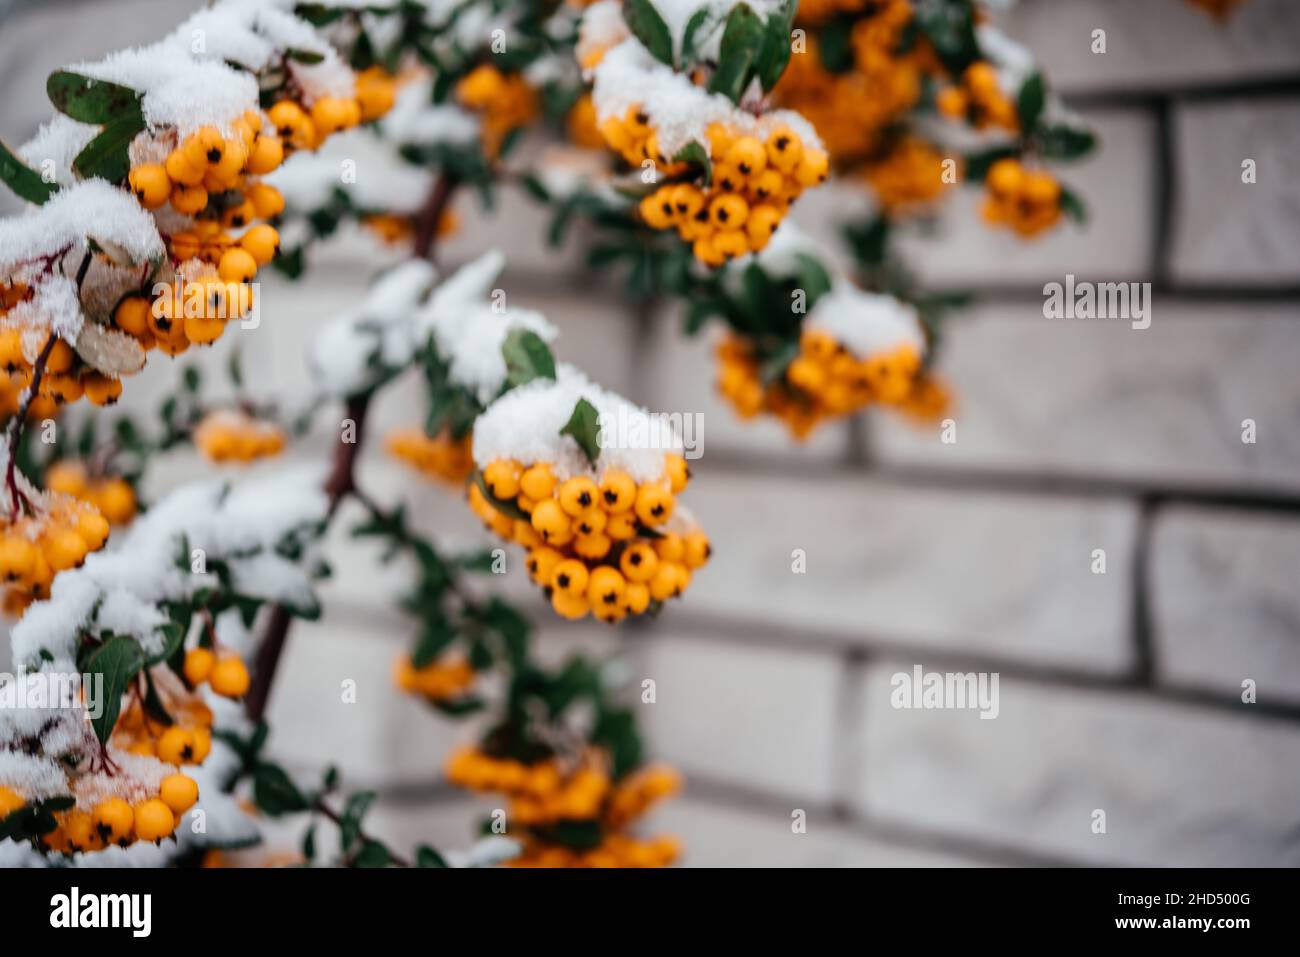 Orange berries of pyracantha firethorn covered with snow winter background Stock Photo